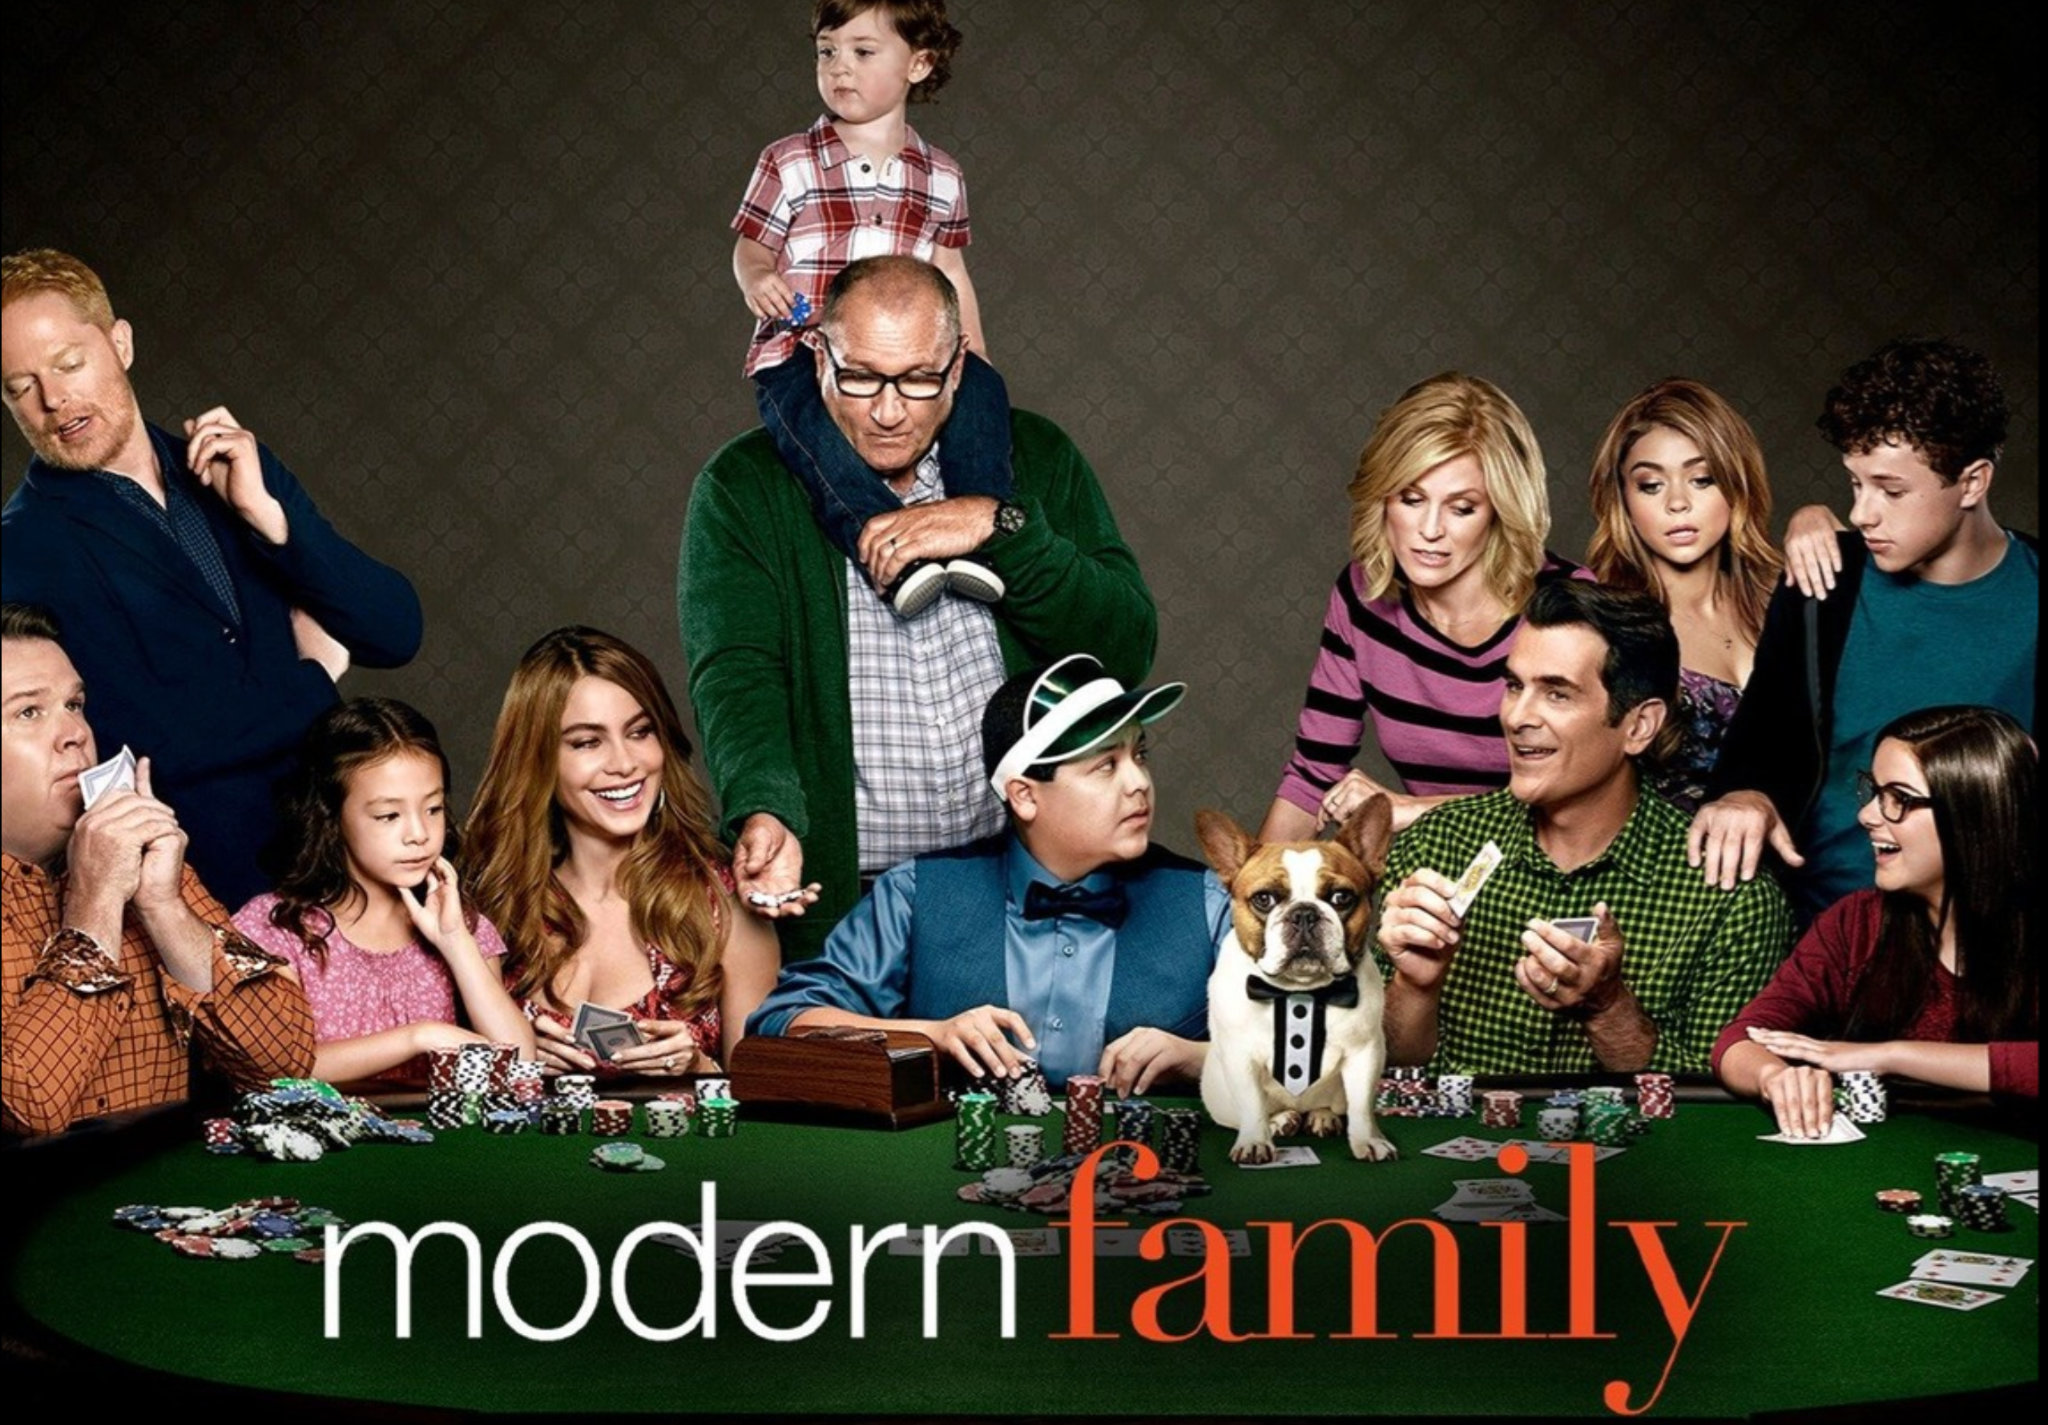 Cast members from the television show Modern Family pose for a publicity picture.